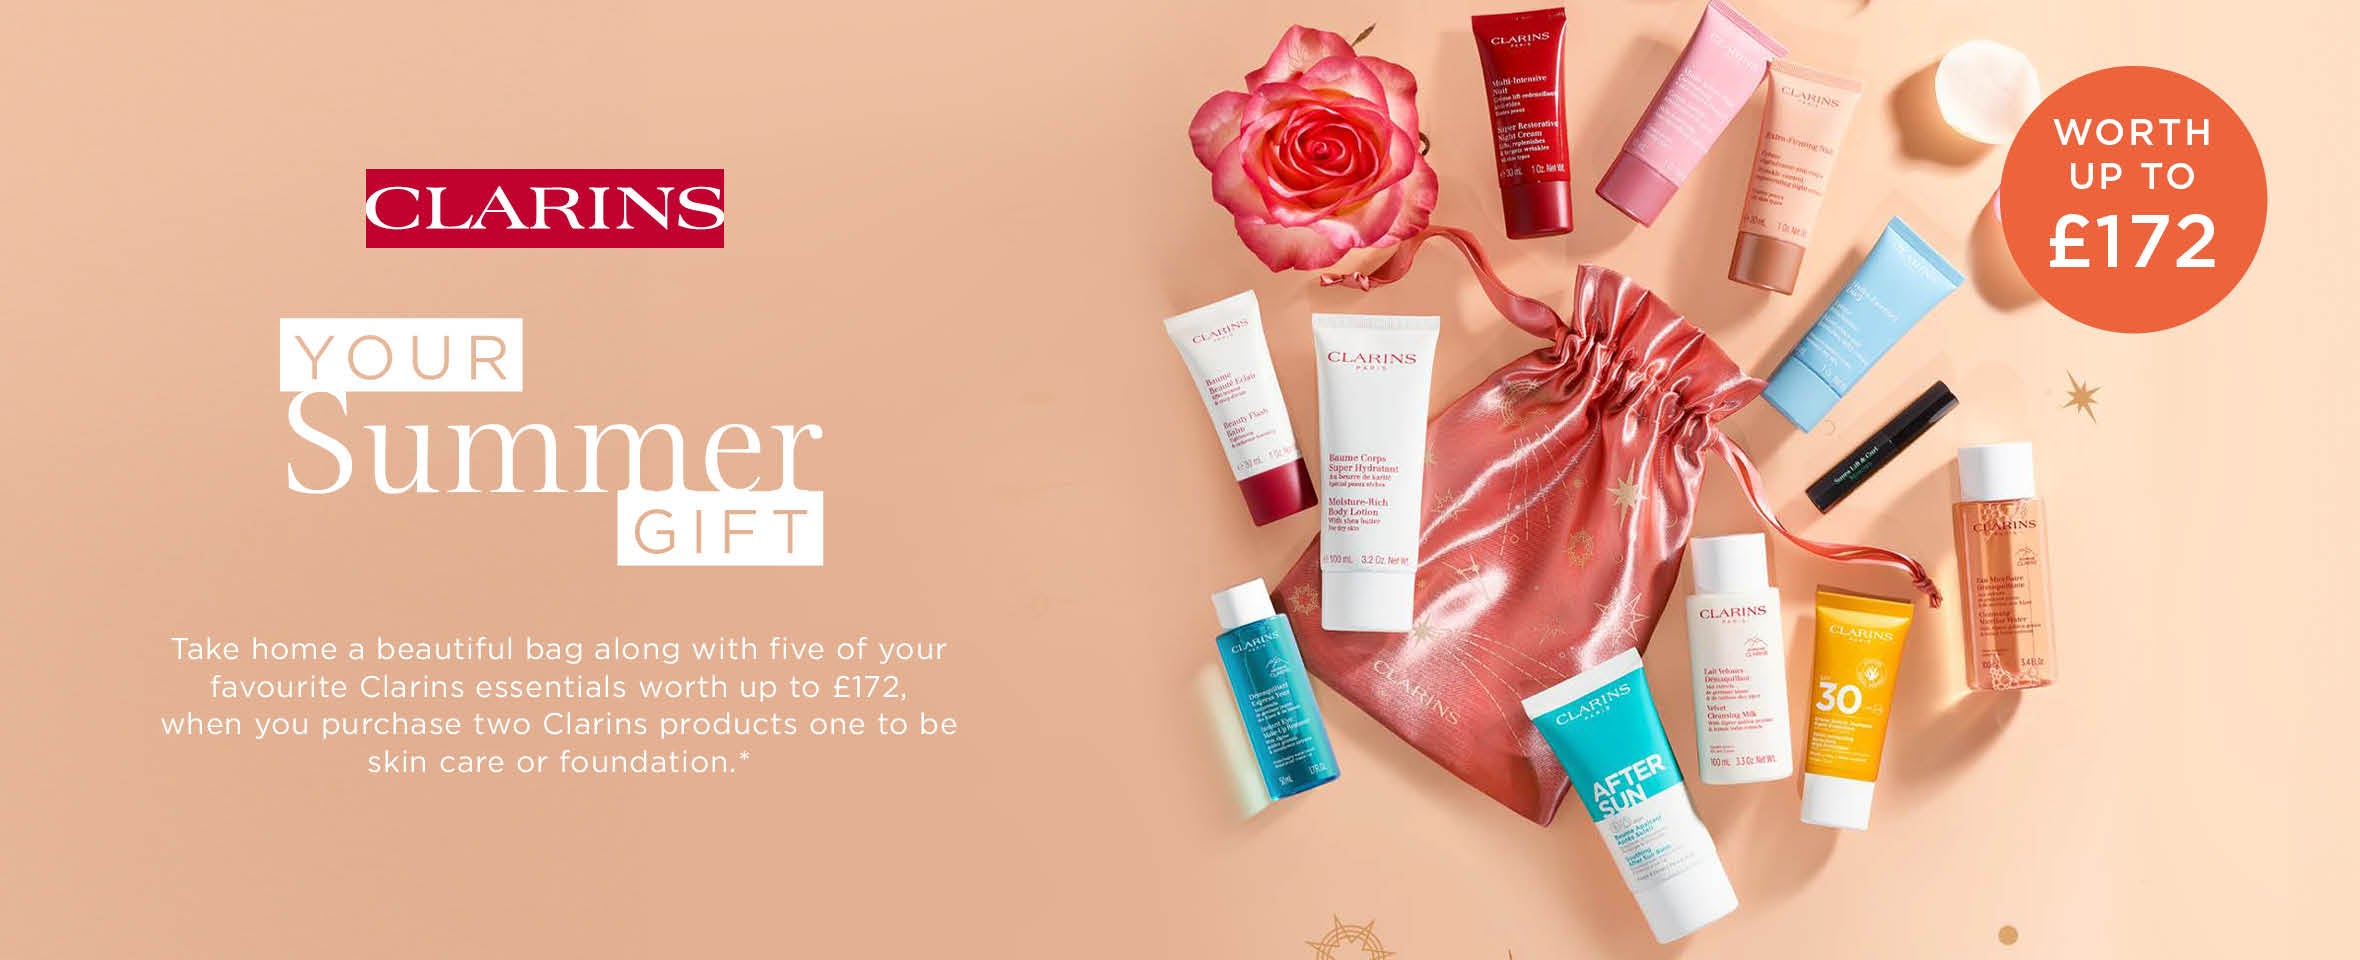 Your gift from Estee Lauder